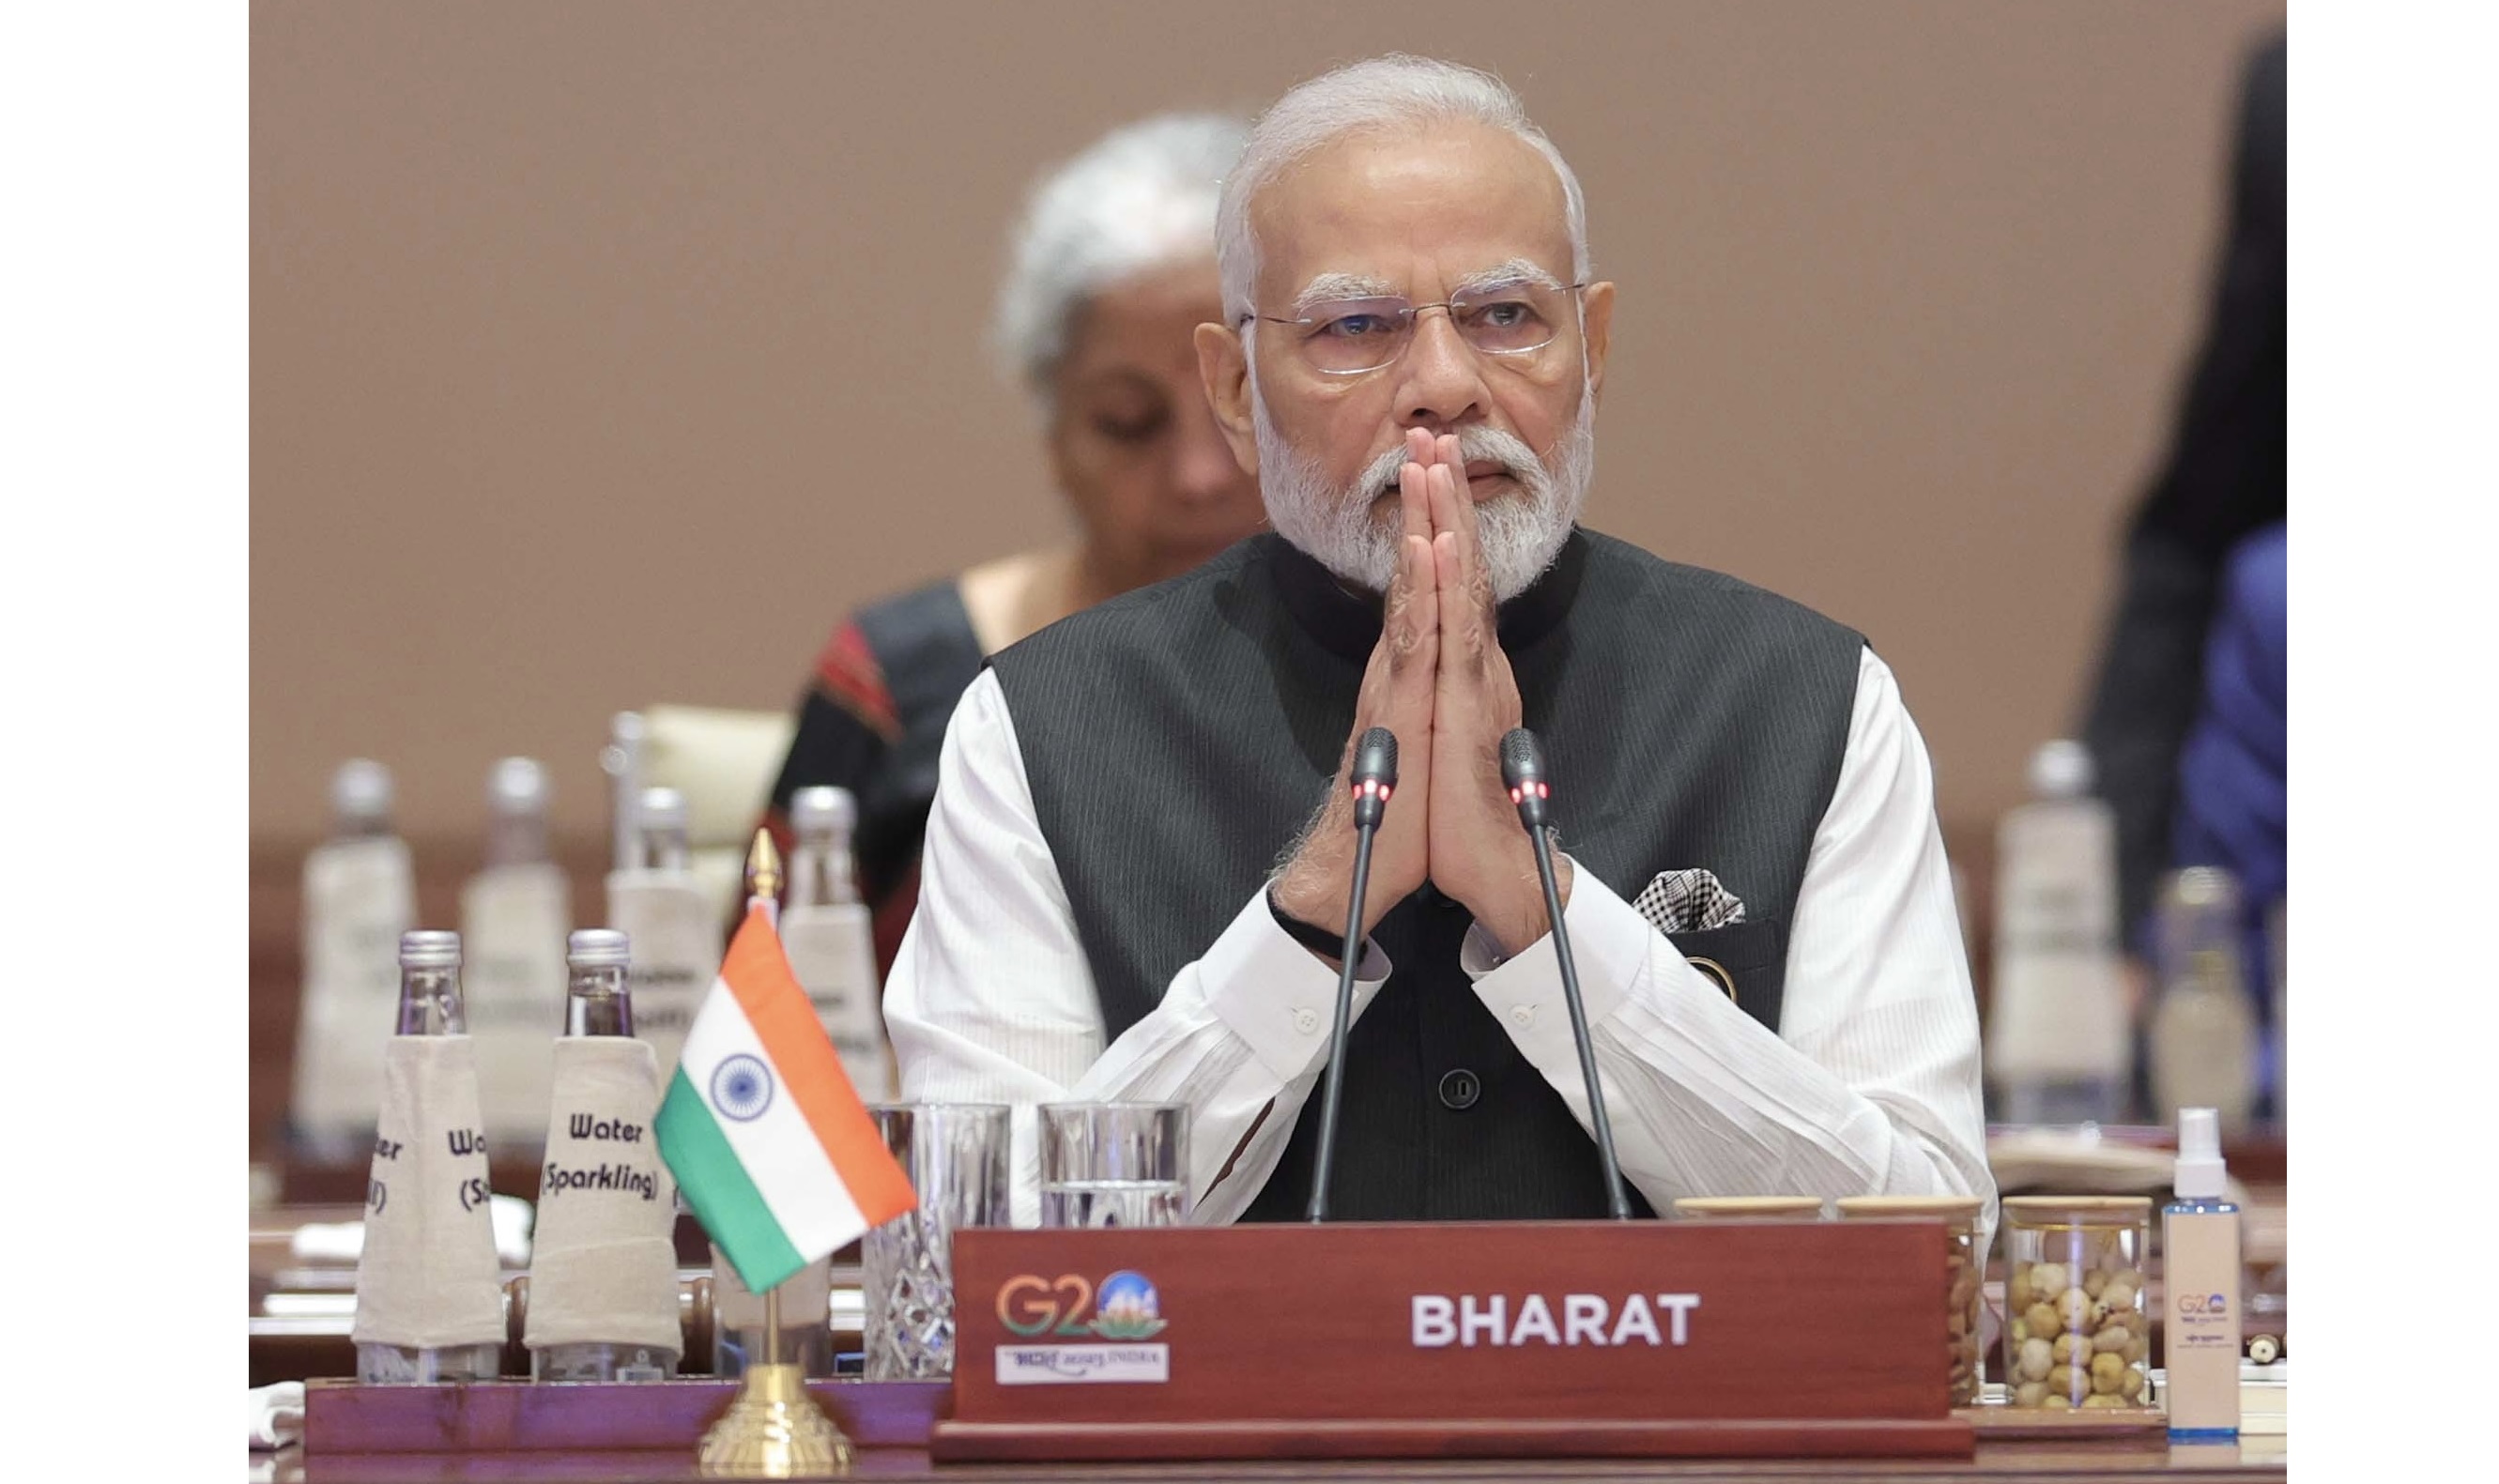 Towards a Brighter Tomorrow: India’s G20 Presidency and the Dawn of a New Multilateralism